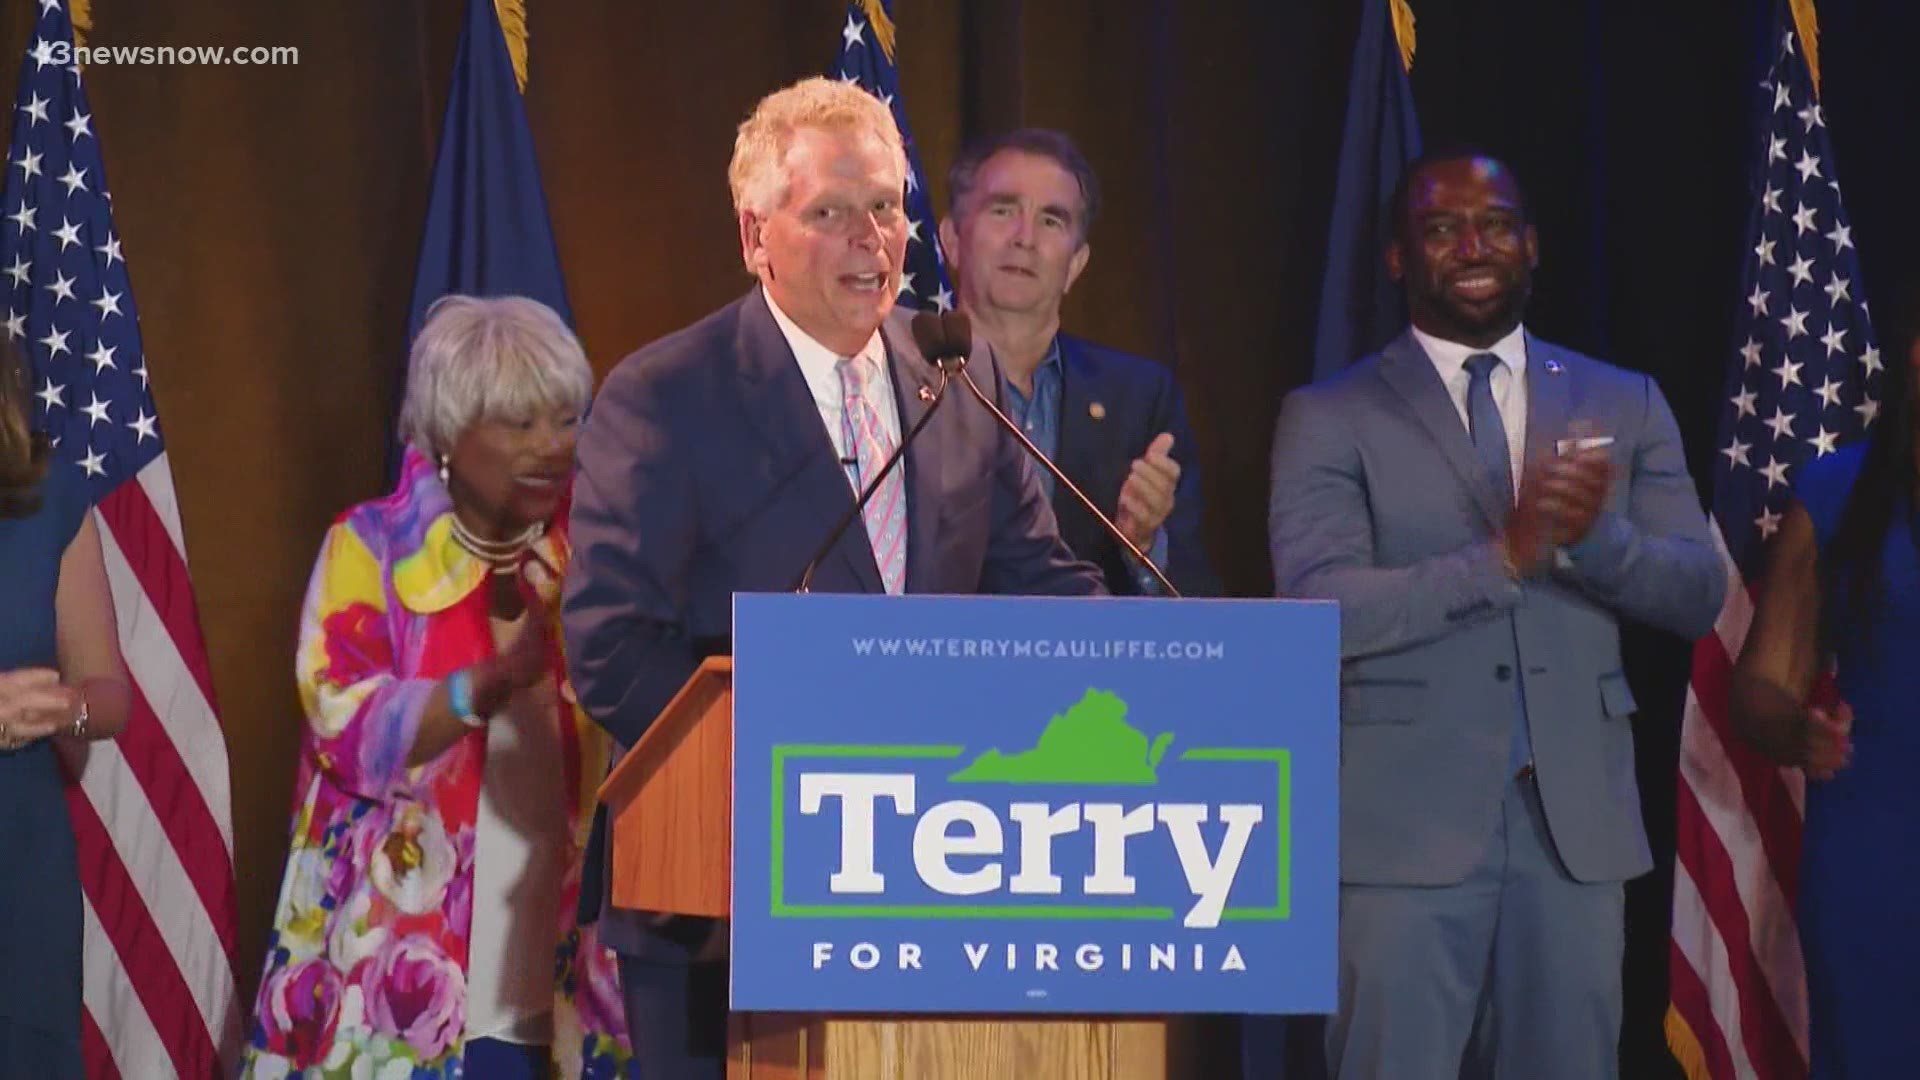 Democrat and former governor Terry McAuliffe ran away with the primary ticket Tuesday.